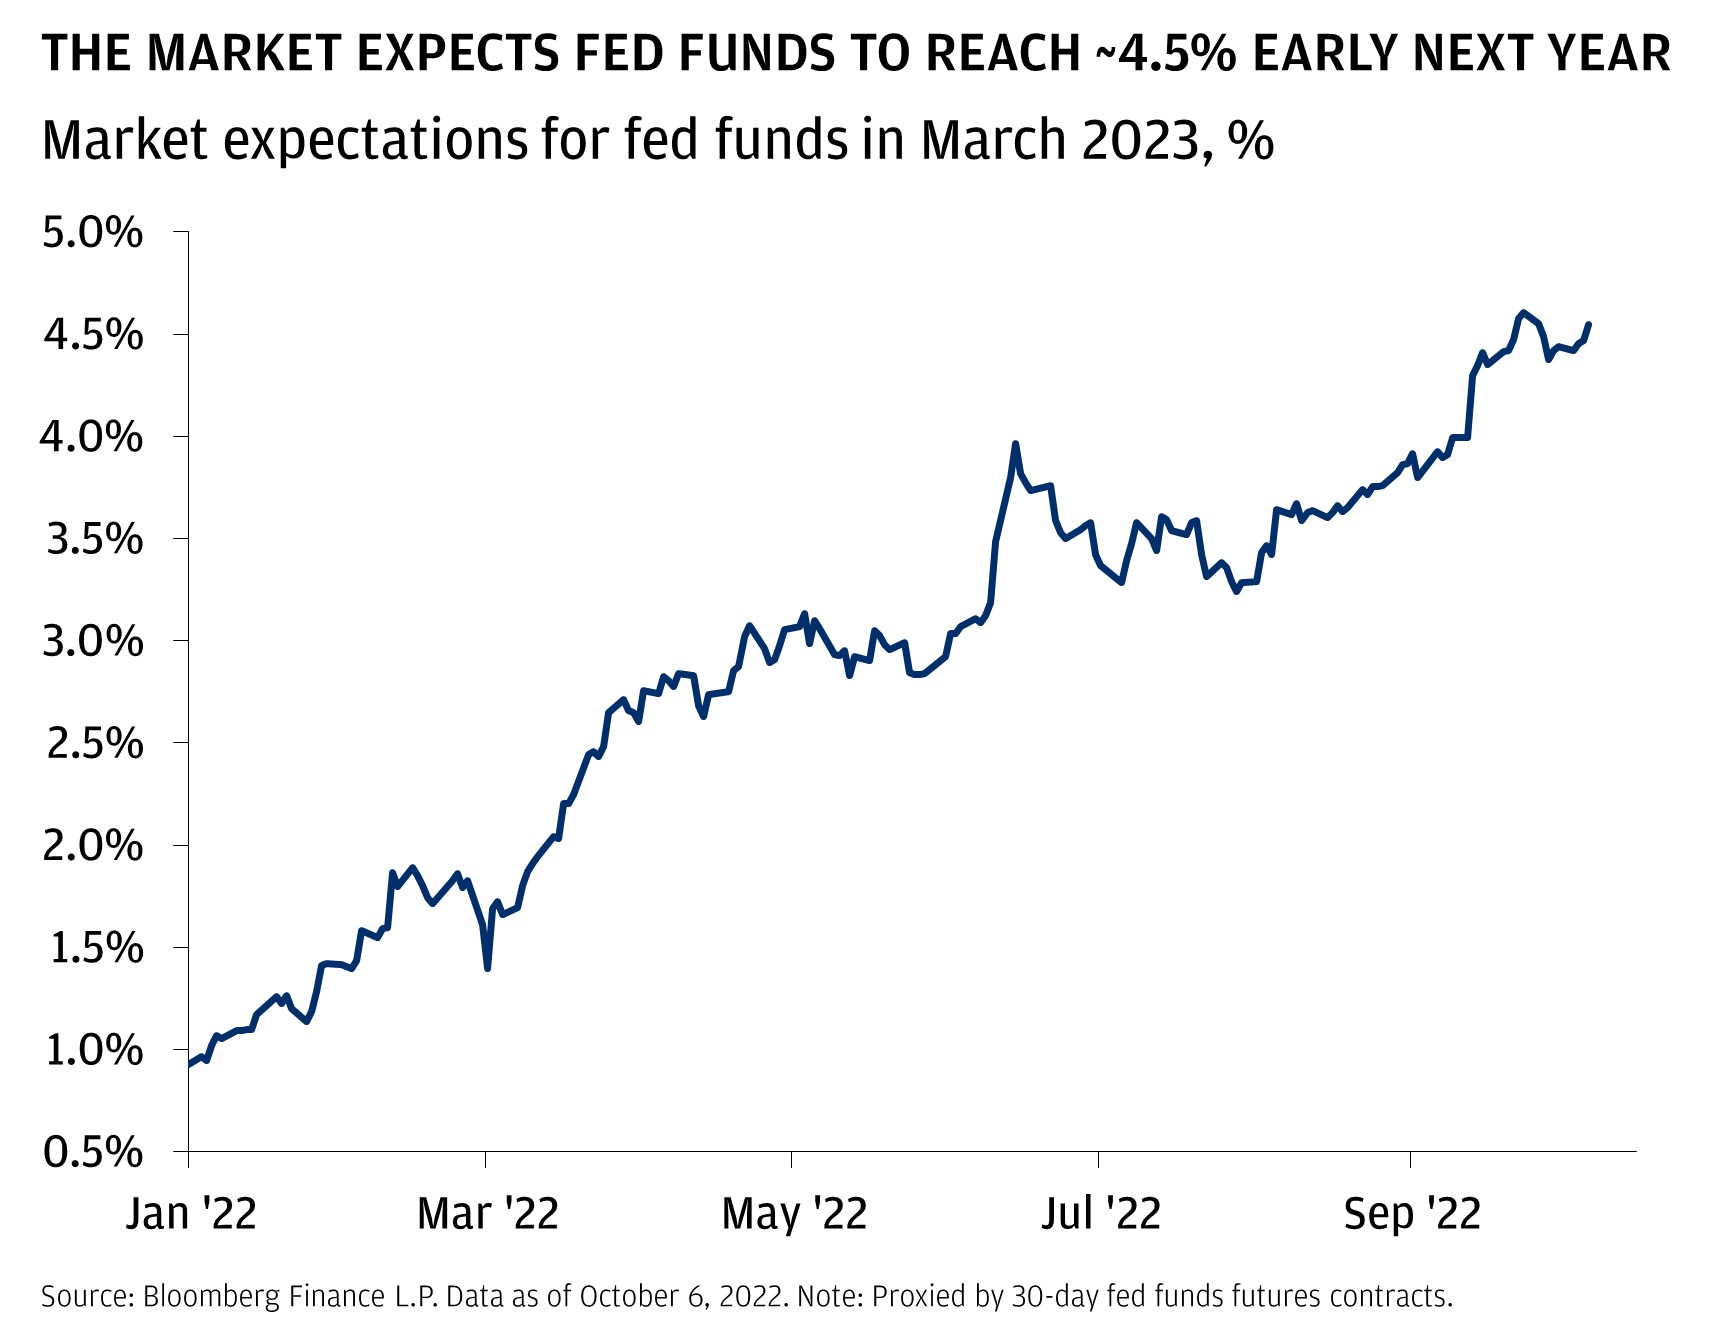 This chart shows market expectations for fed funds in March 2023 (proxied by 30-day fed funds futures contracts) from January 2022 to October 2022